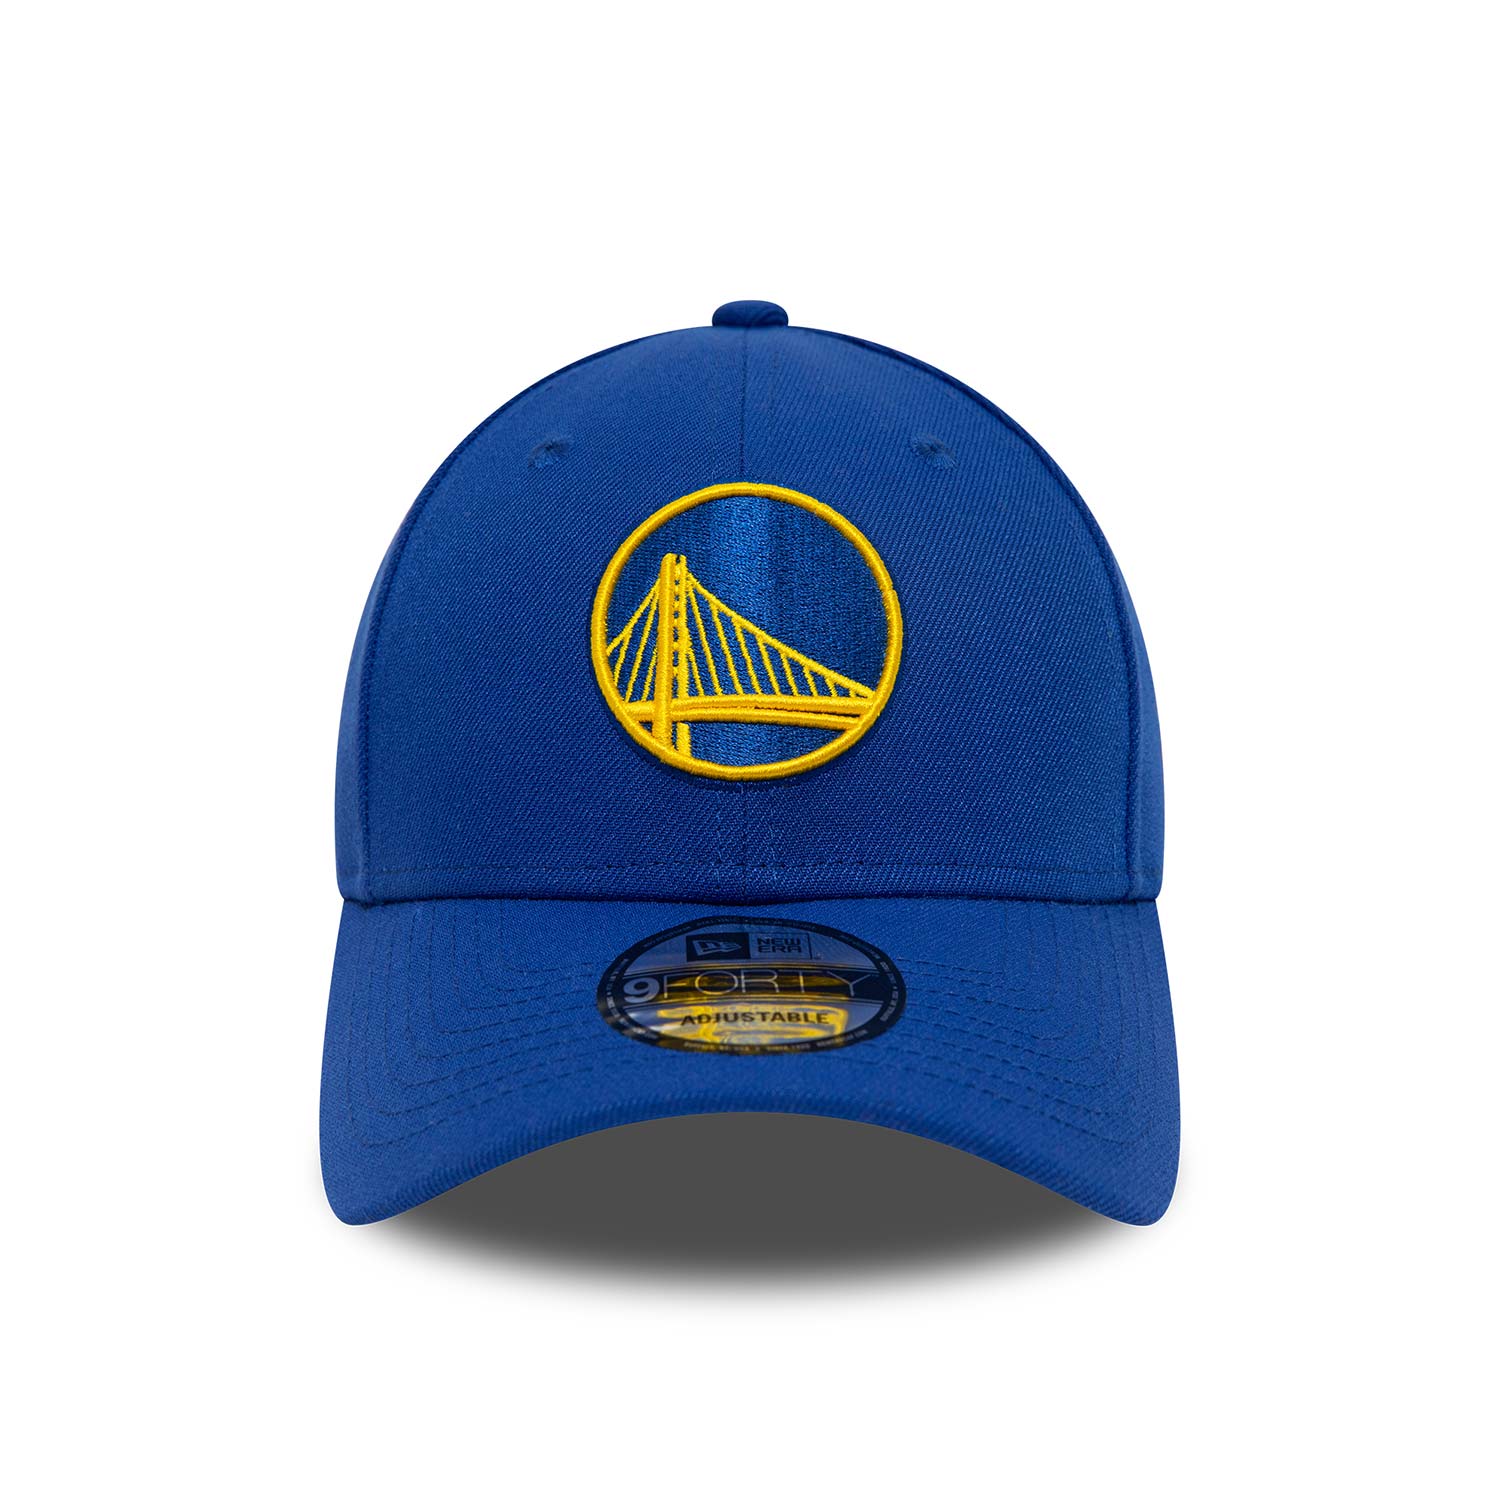 Golden State Warriors League 9FORTY-Kappe in Blau